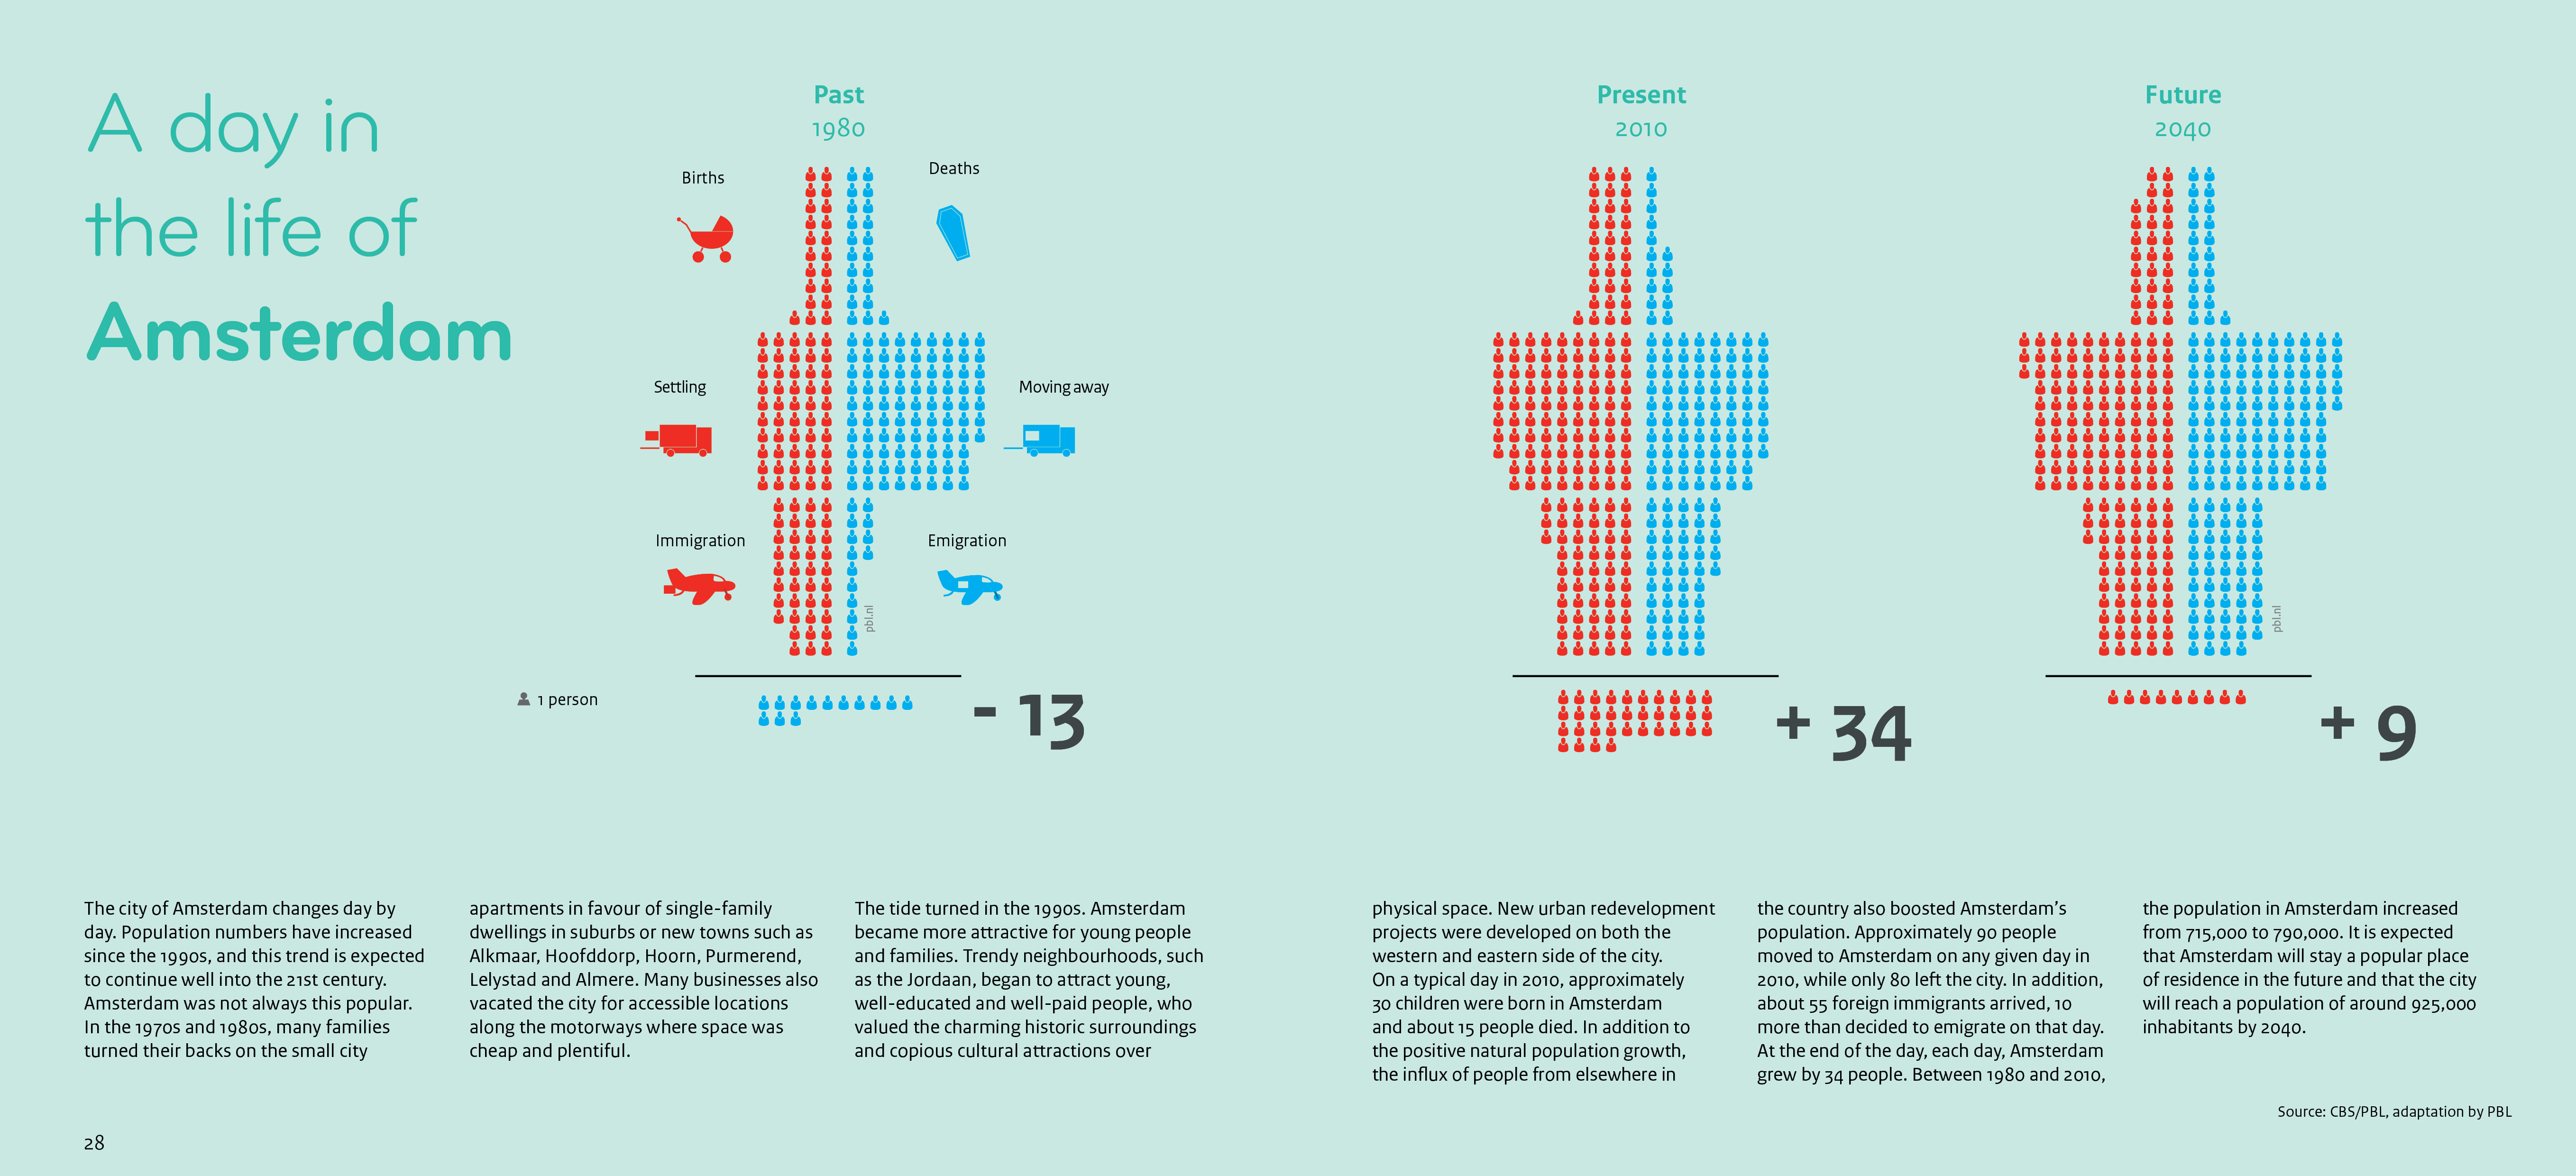 This infographic shows the population change per day in Amsterdam in 1980 and 2010 and includes a projection for 2040.